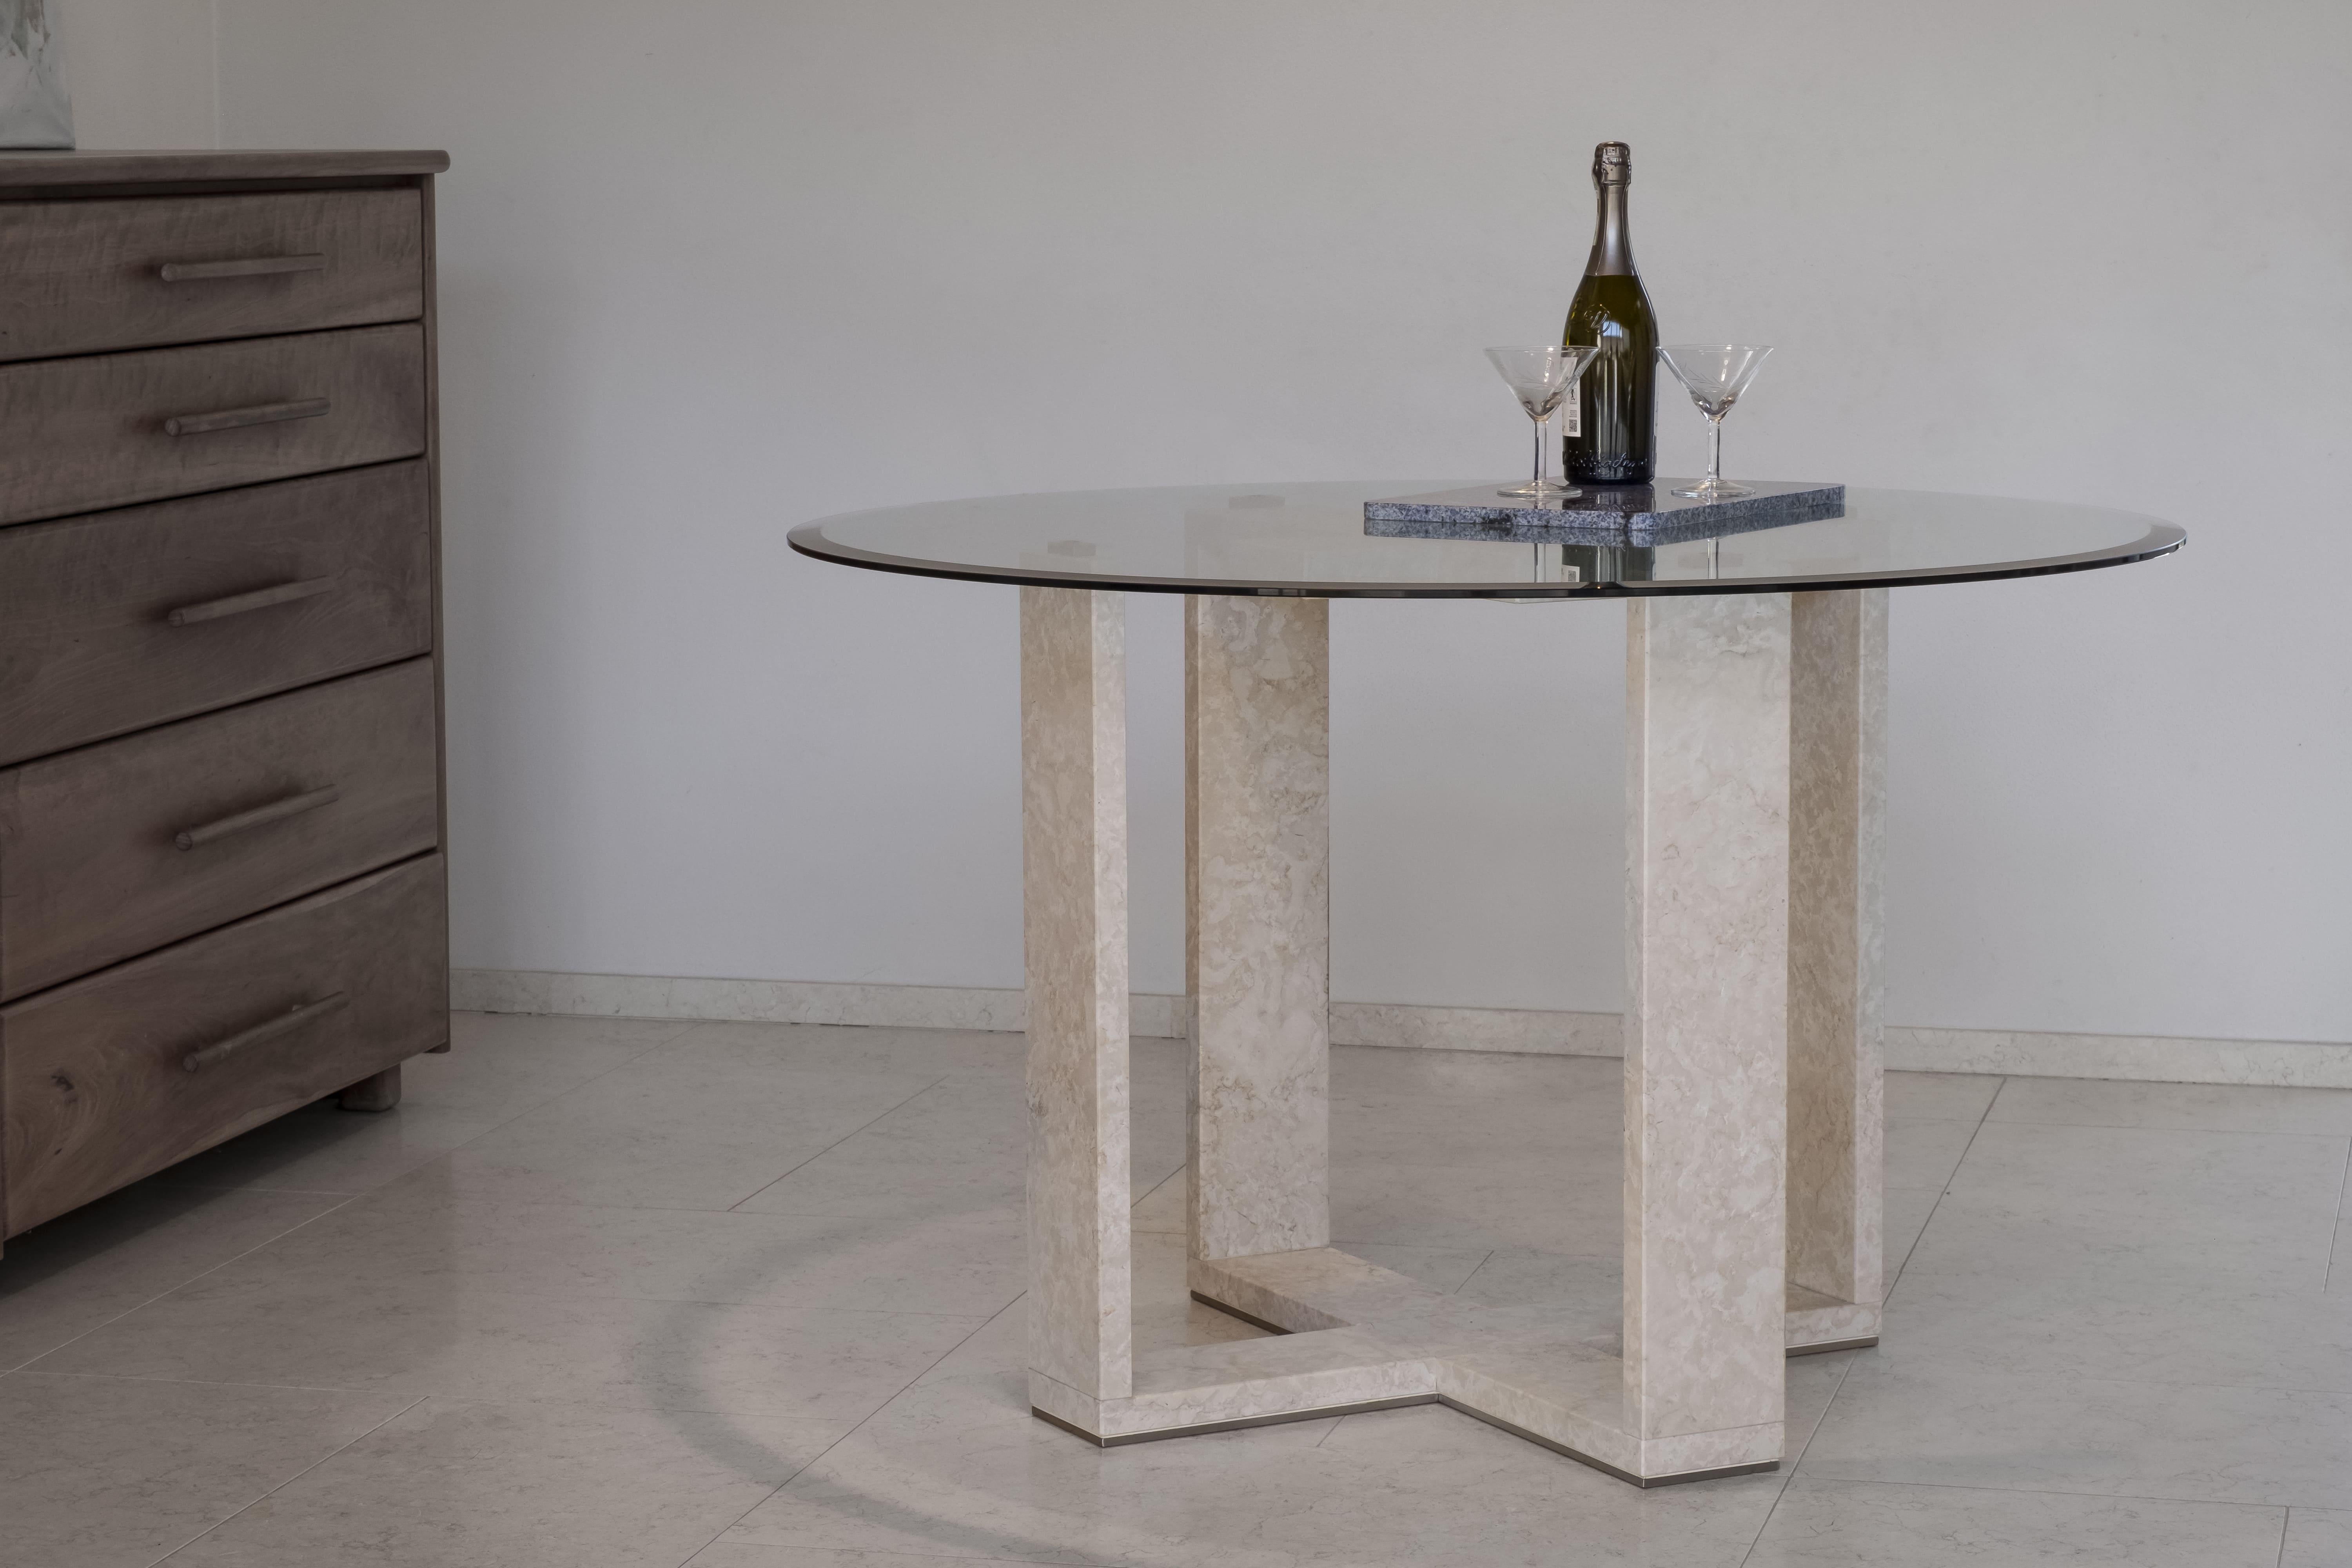 The Simple Frame marble table is a circular table characterized by the peculiarity of its legs. 
Made entirely of marble, the legs of Simple Frame are simple, linear and give the table a modern style that can be adapted to types of